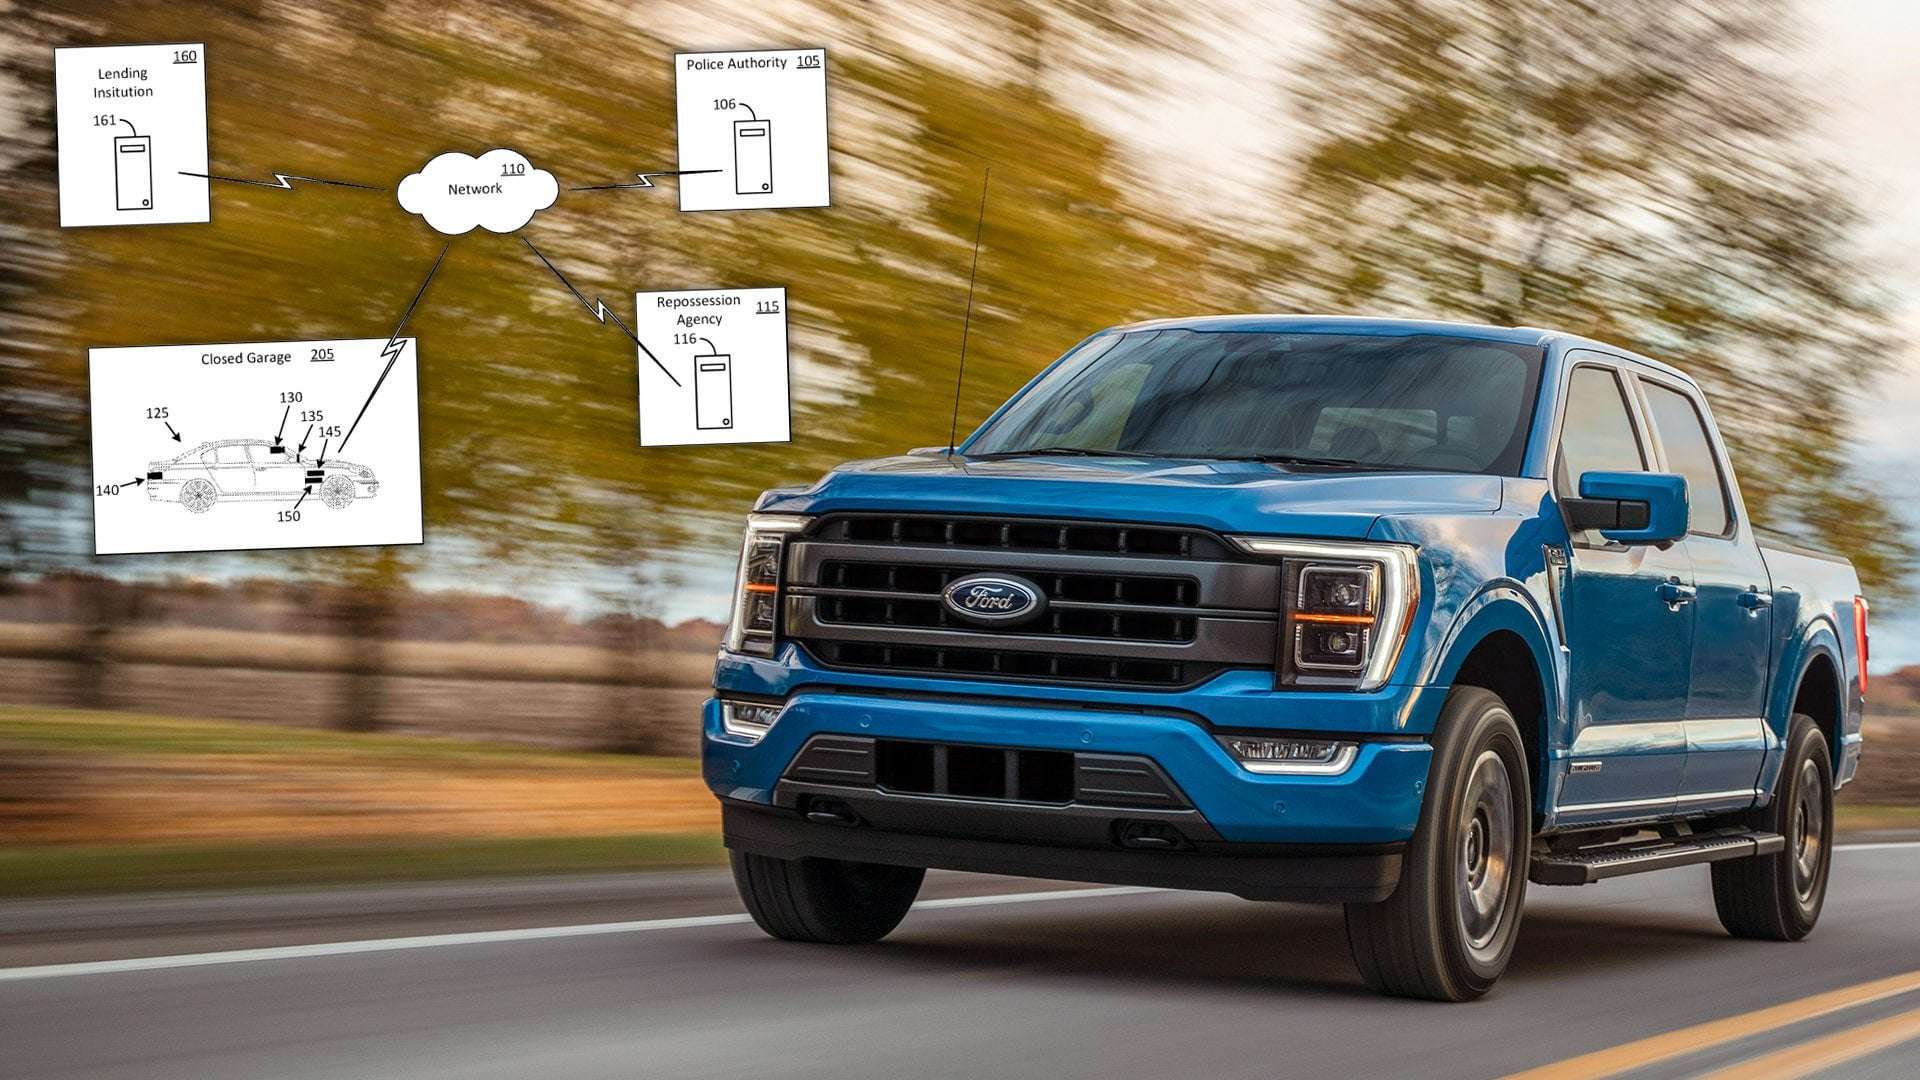 image for Future Fords Could Repossess Themselves and Drive Away if You Miss Payments